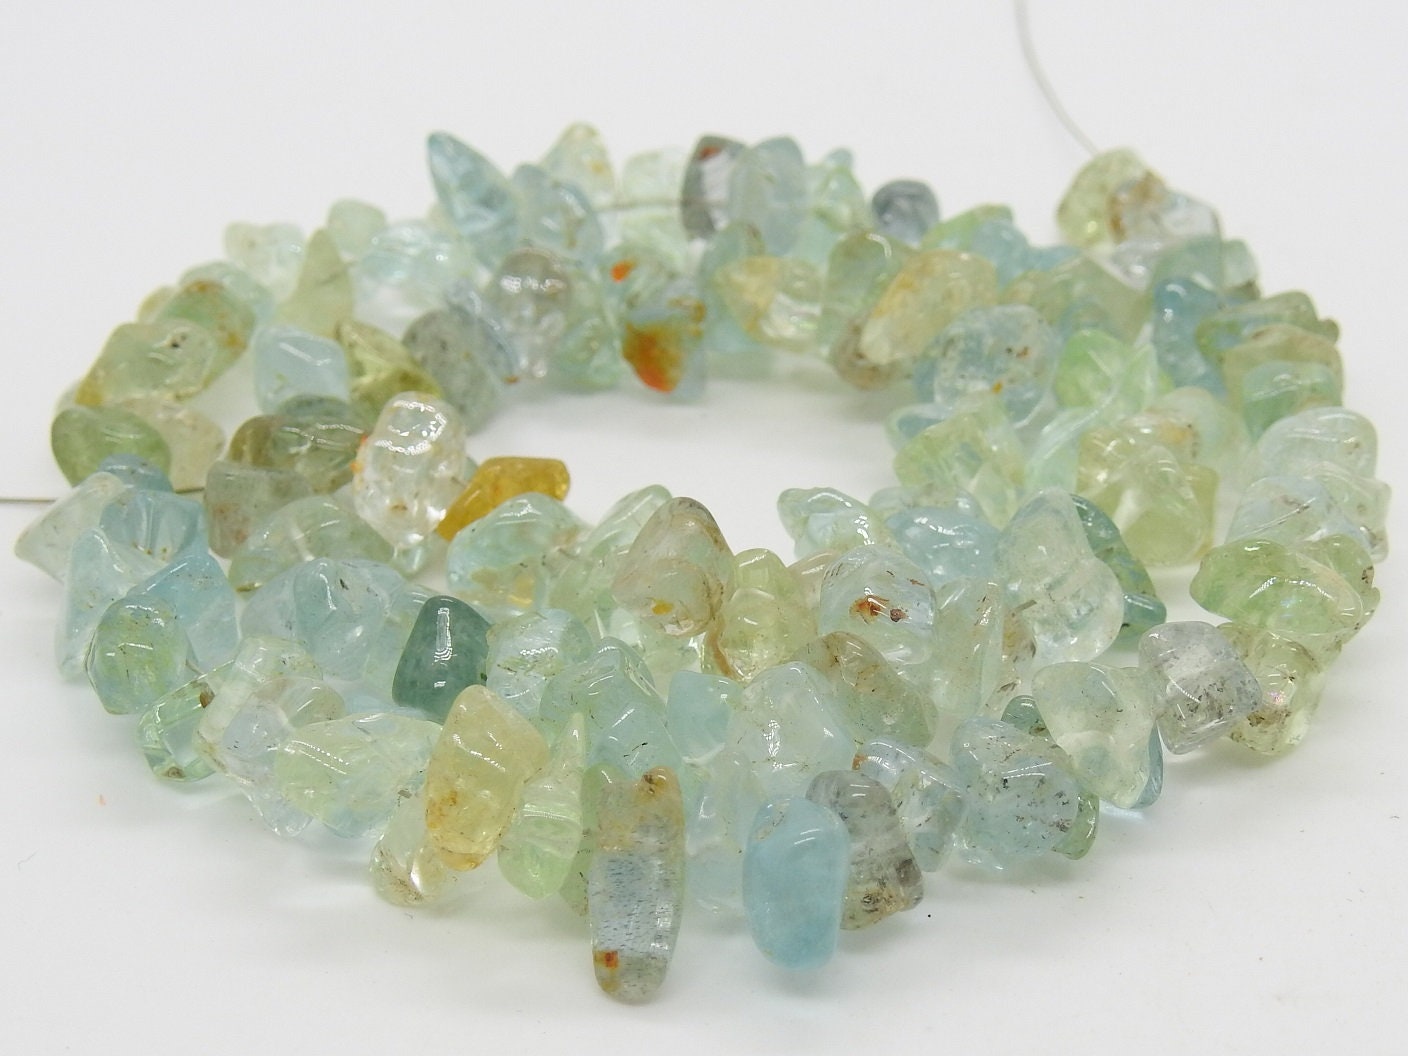 100%Natural,Aquamarine Polished Rough Beads,Anklets,Chips,Uncut 10X5To5X4MM Approx,Wholesale Price,New Arrival RB1 | Save 33% - Rajasthan Living 19